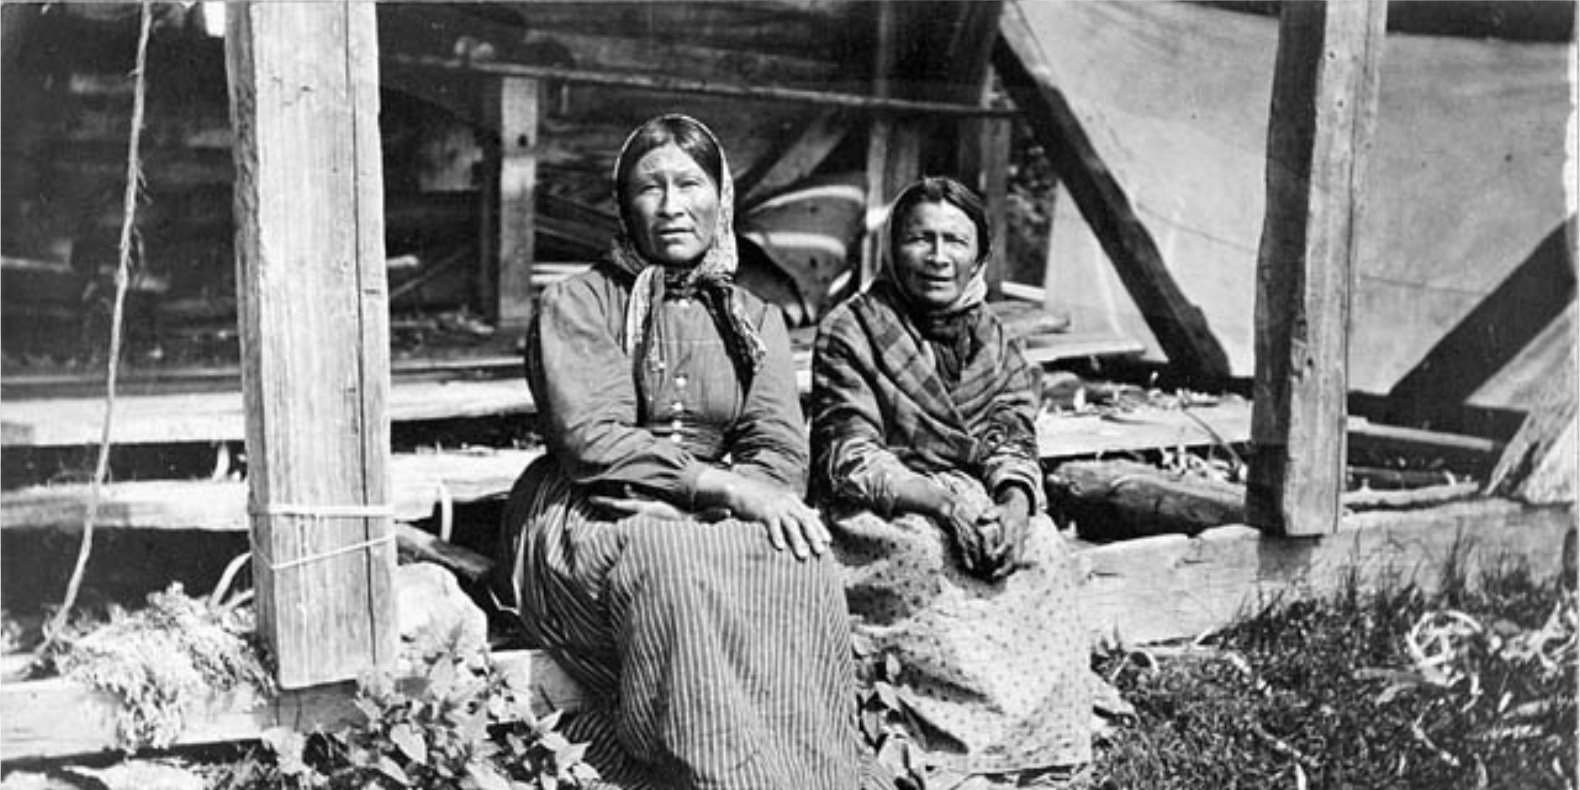 Two Ojibway women from Flying Post First Nation during Treaty 9 payment ceremony at New Brunswick House, Ontario, July 1906.